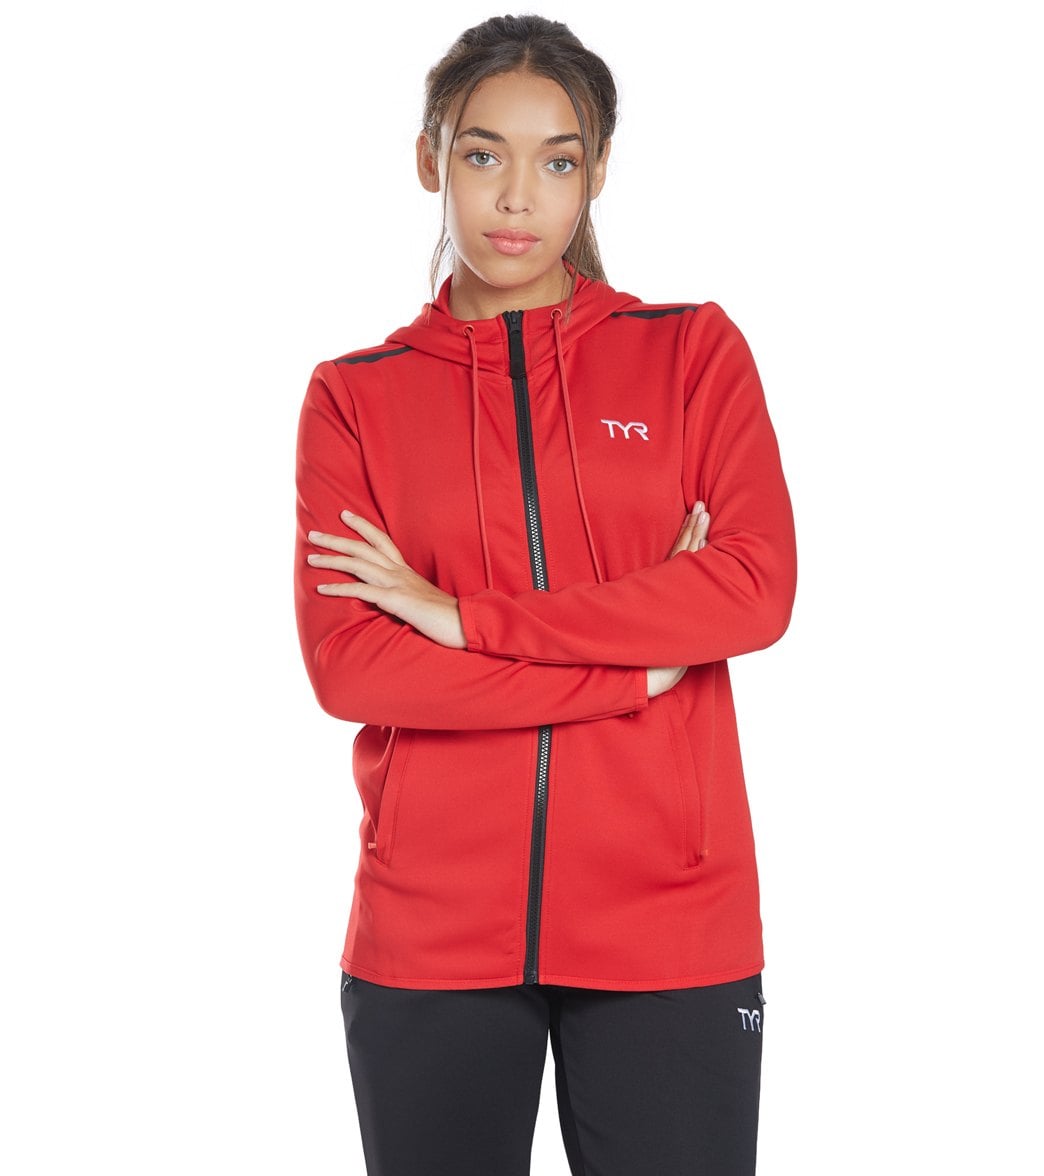 TYR Women's Team Full Zip Hoodie - Red Large Size Large Polyester - Swimoutlet.com